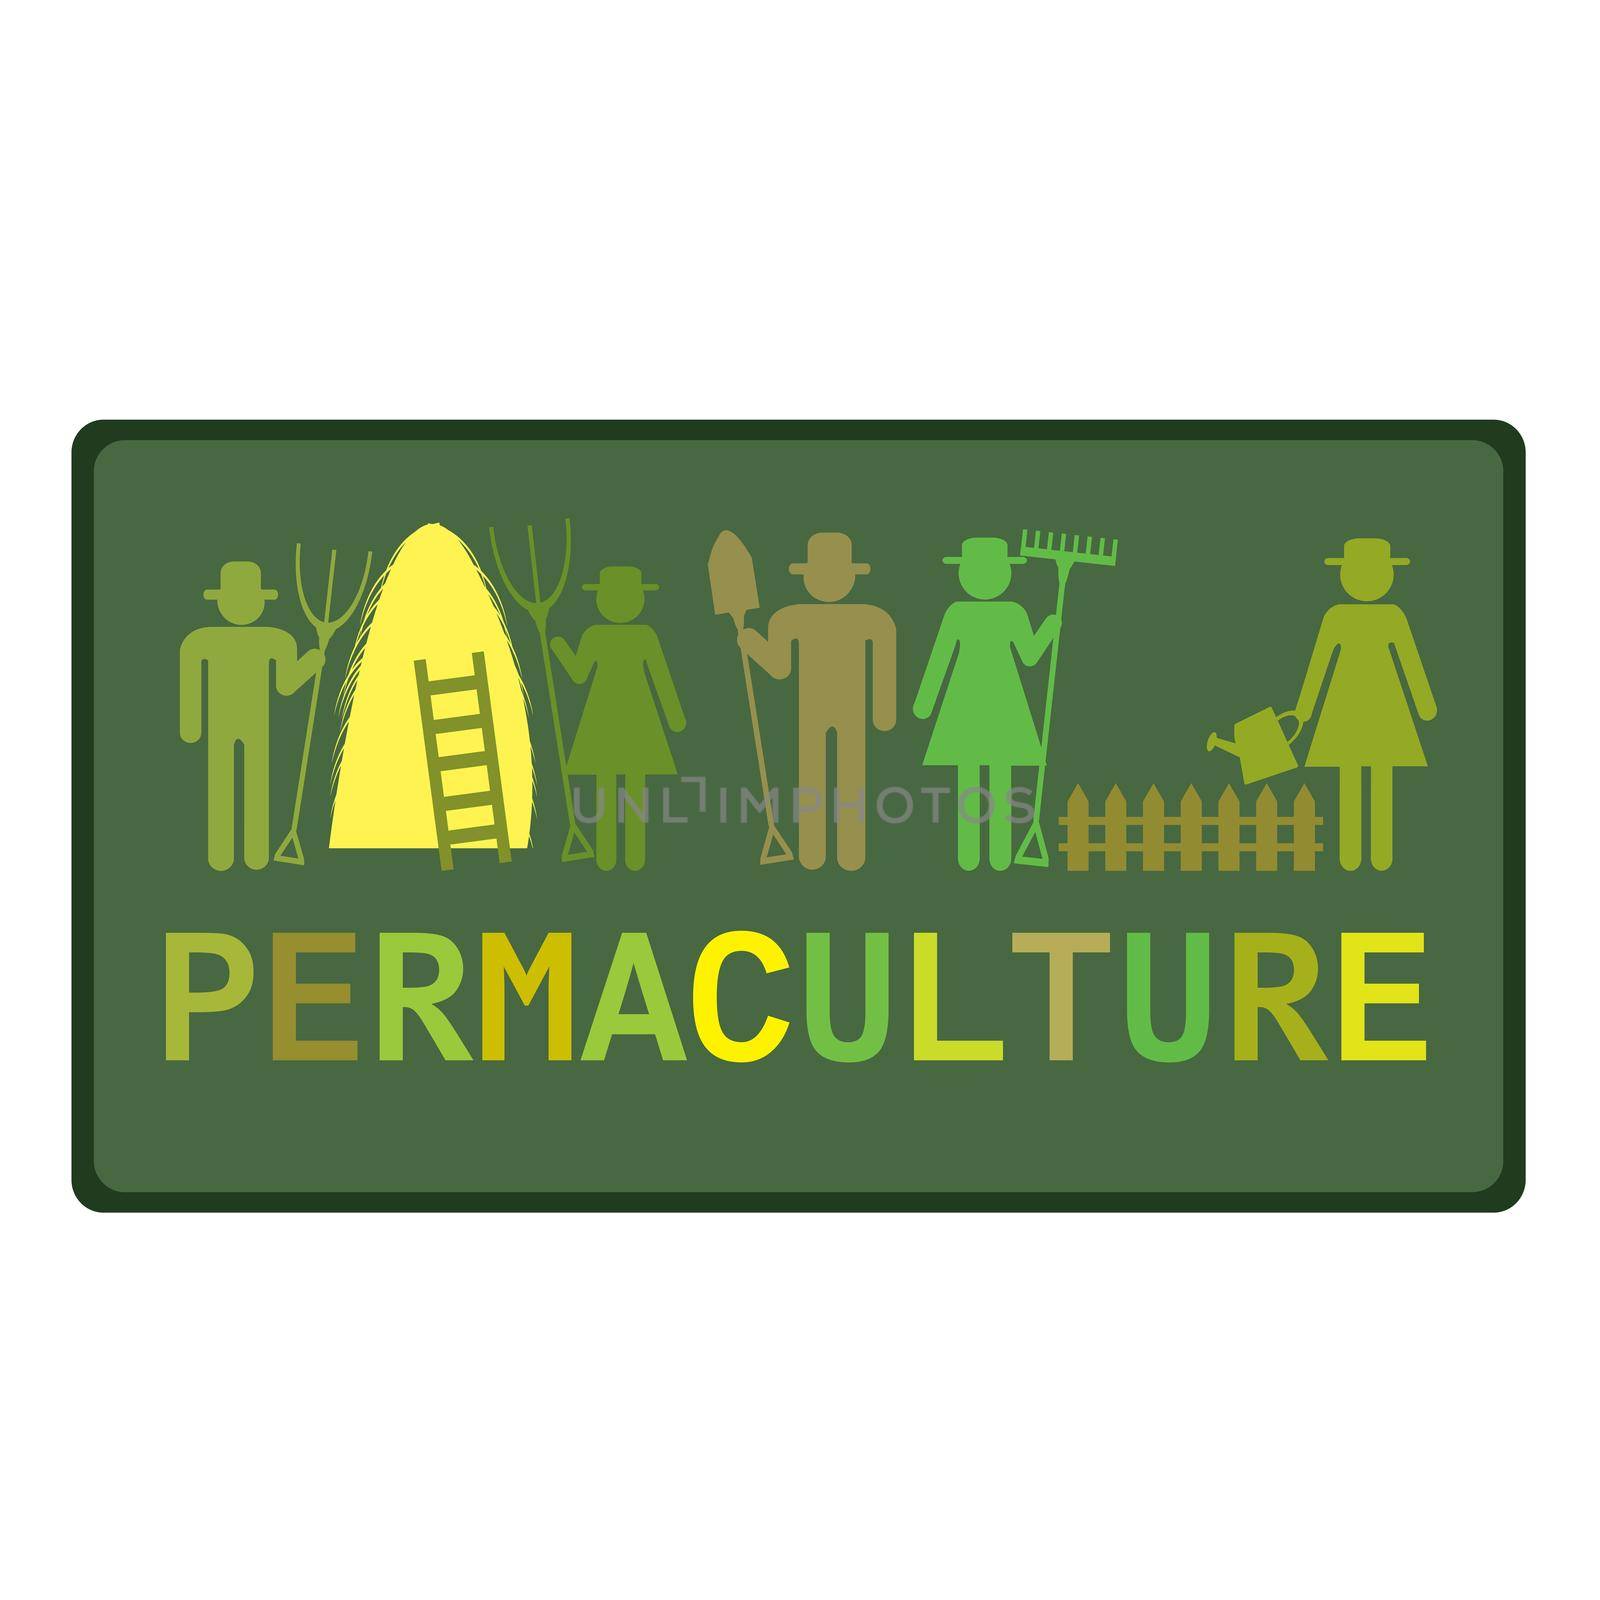 Permaculture concept with stylized pictograms of workers by hibrida13